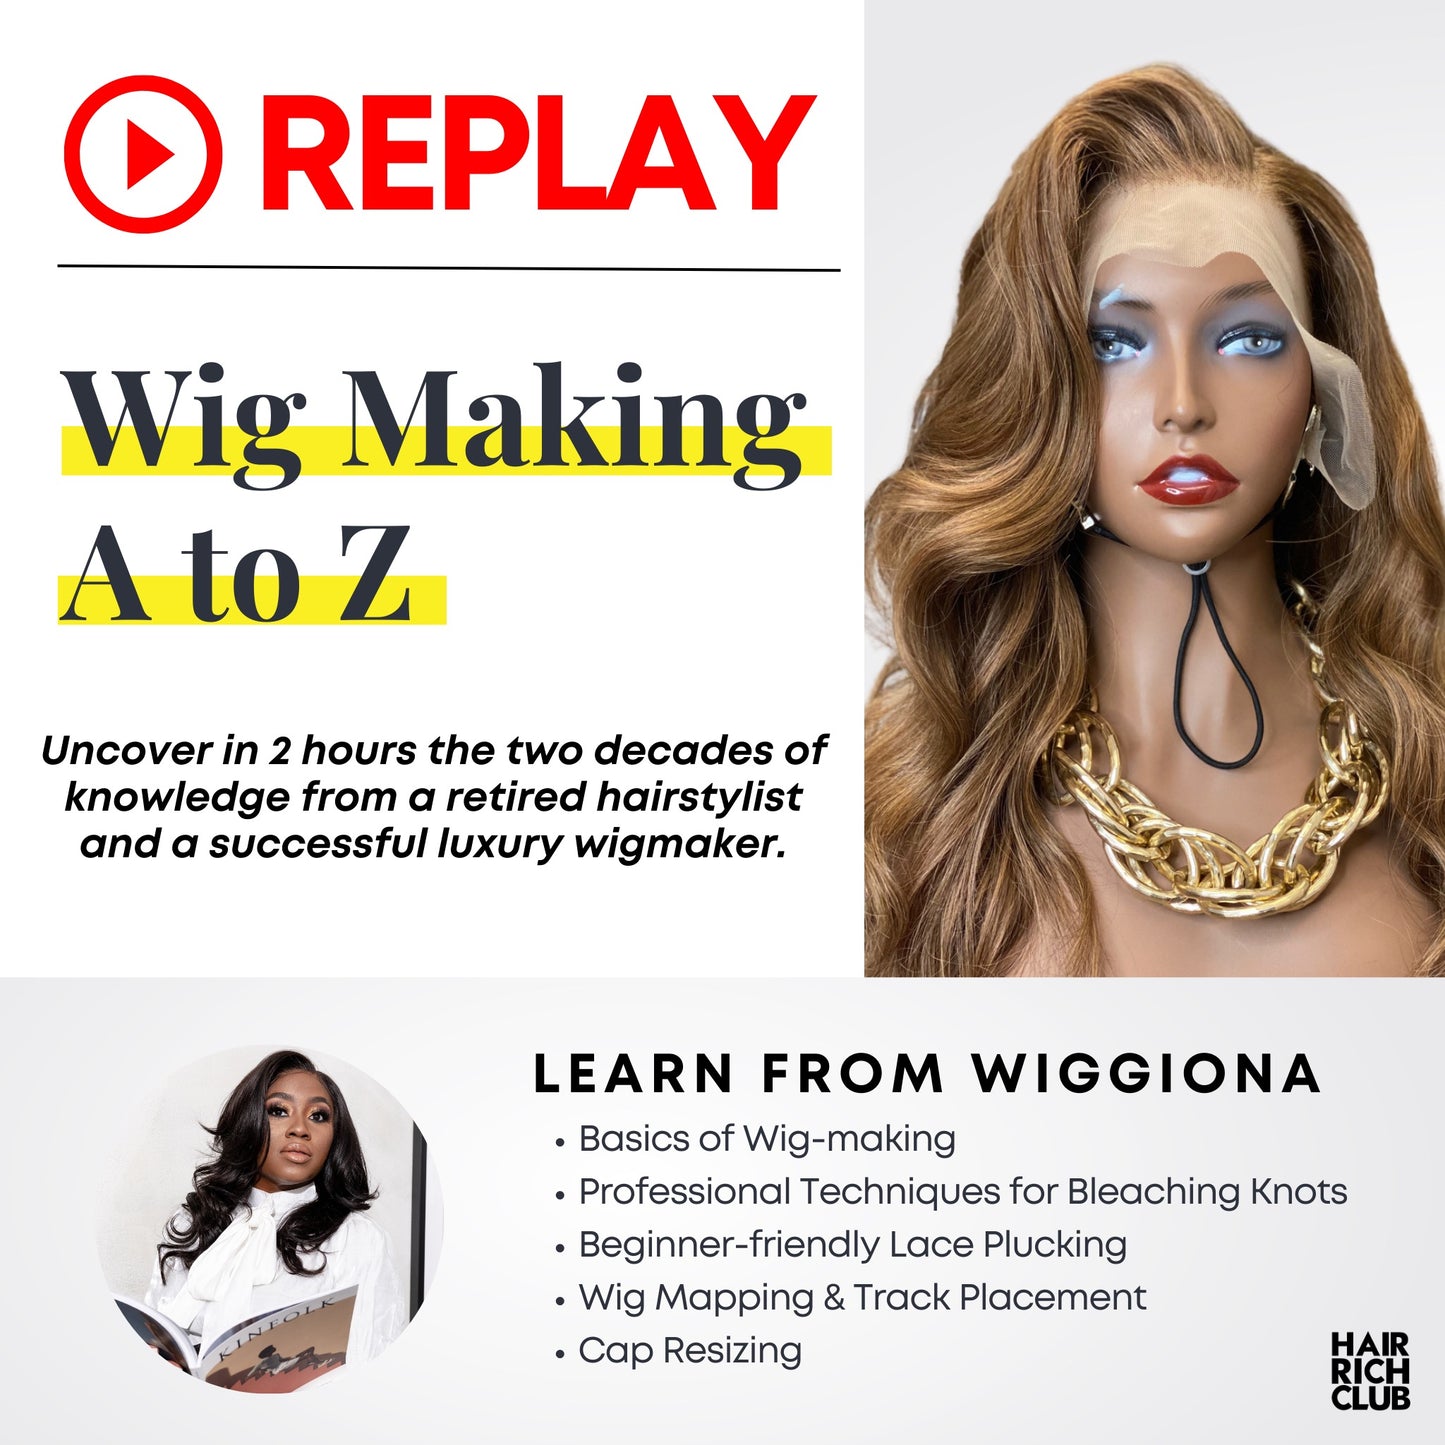 Wig Making A to Z